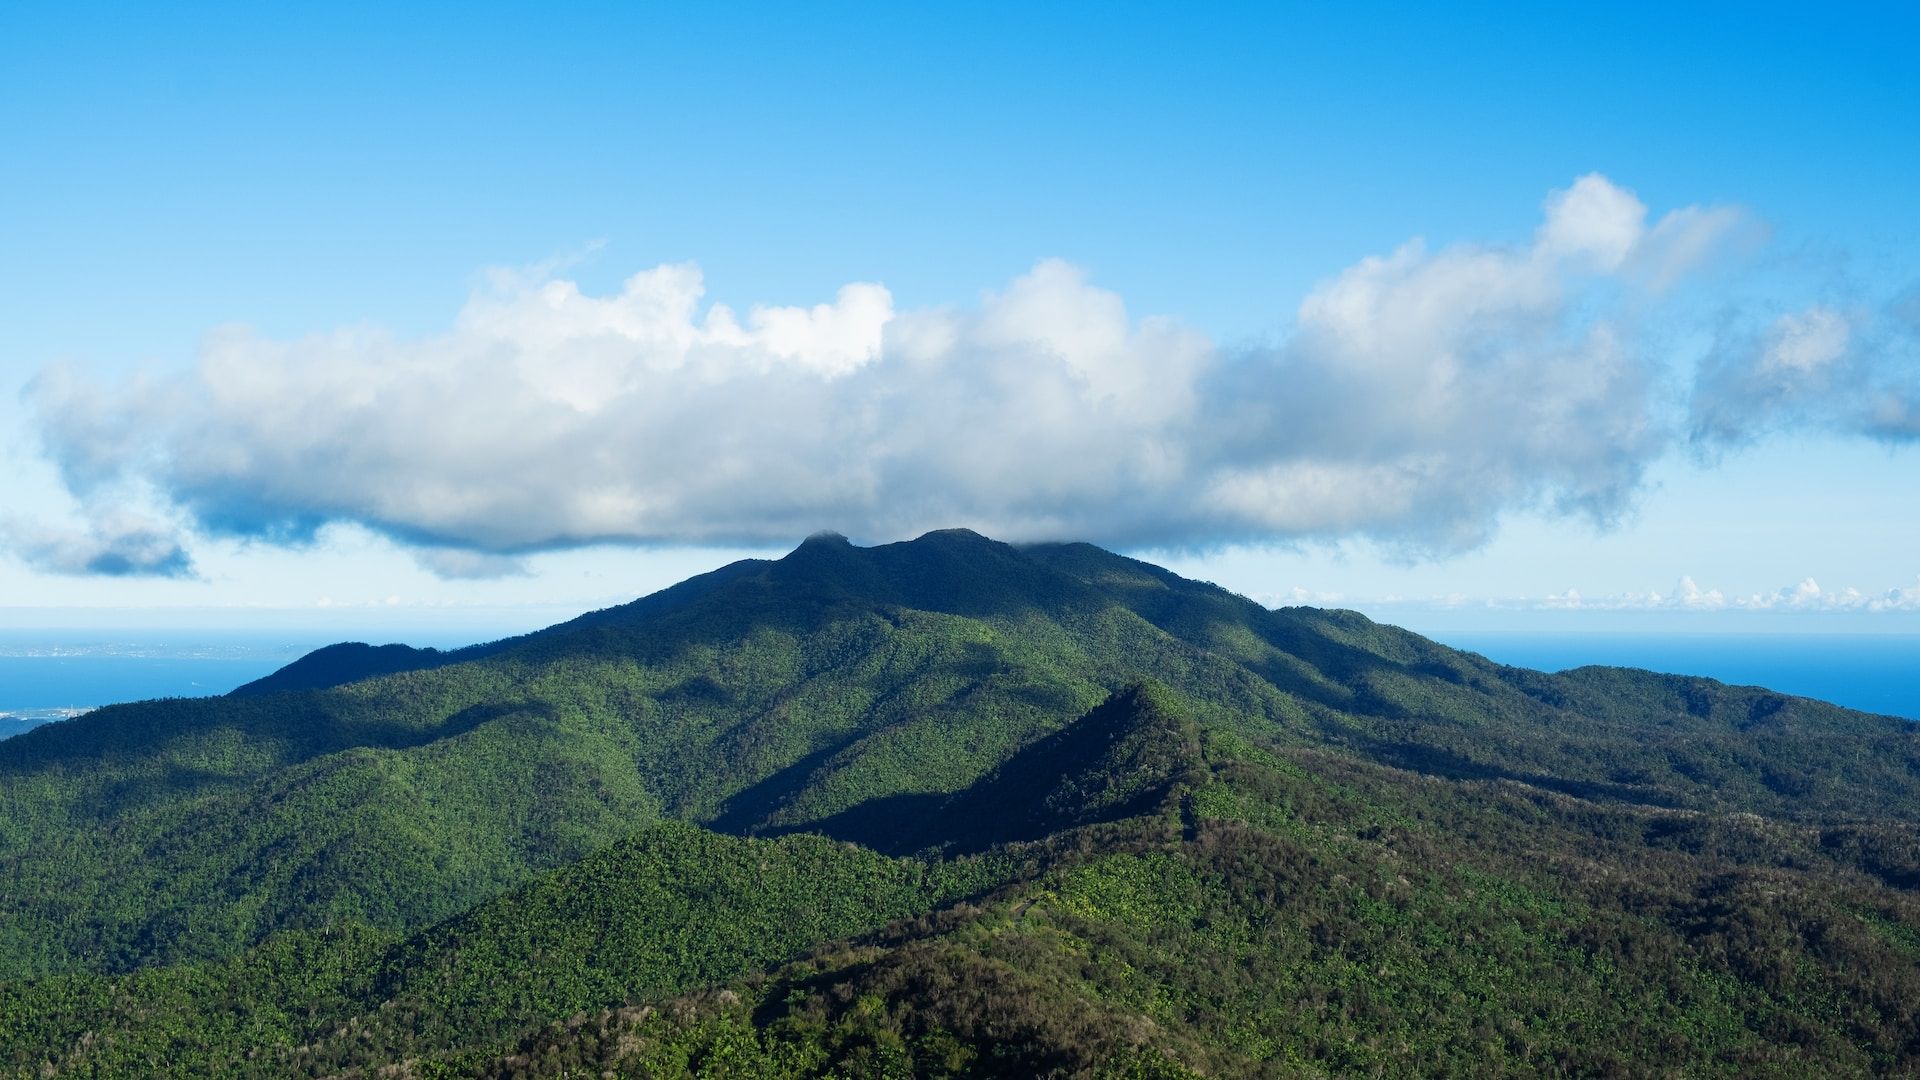 El Yunque National Forest in northeastern Puerto Rico.